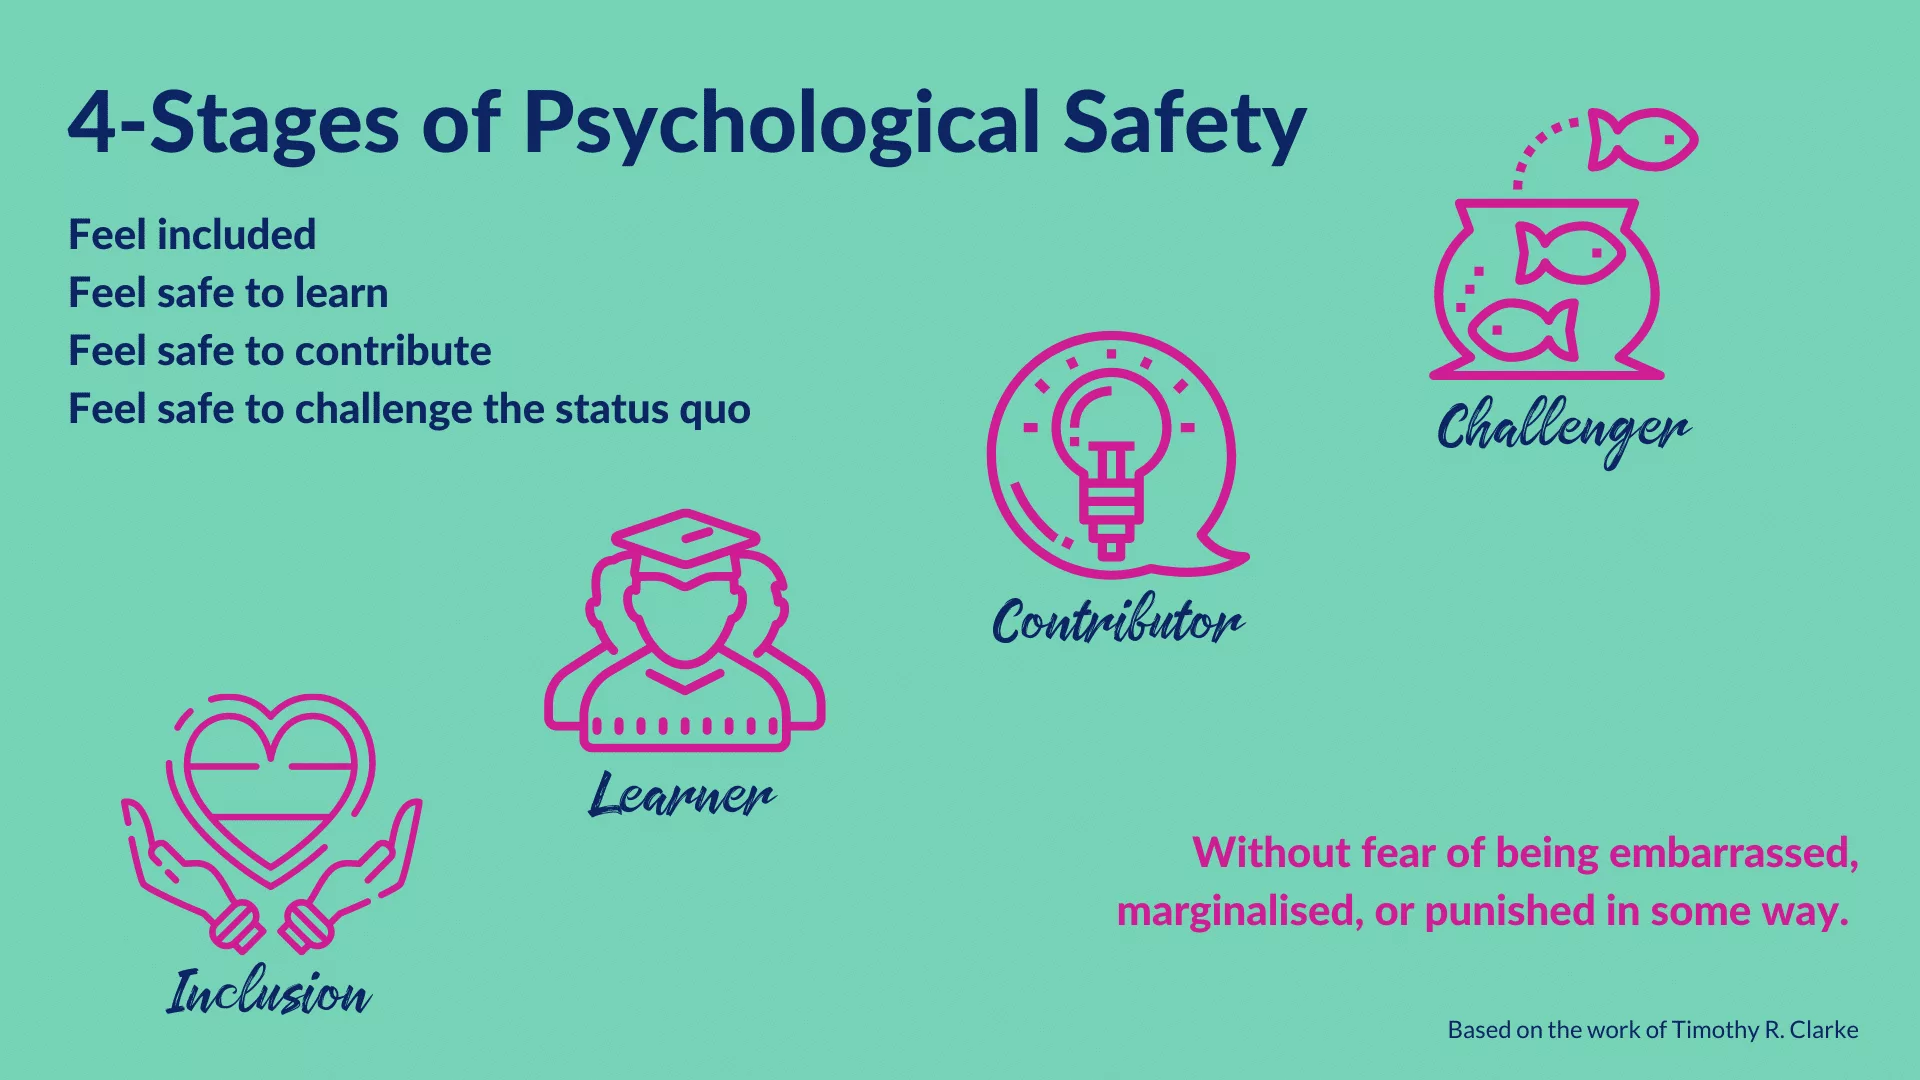 Image of the 4 Stage of Psychological Safety and explanation